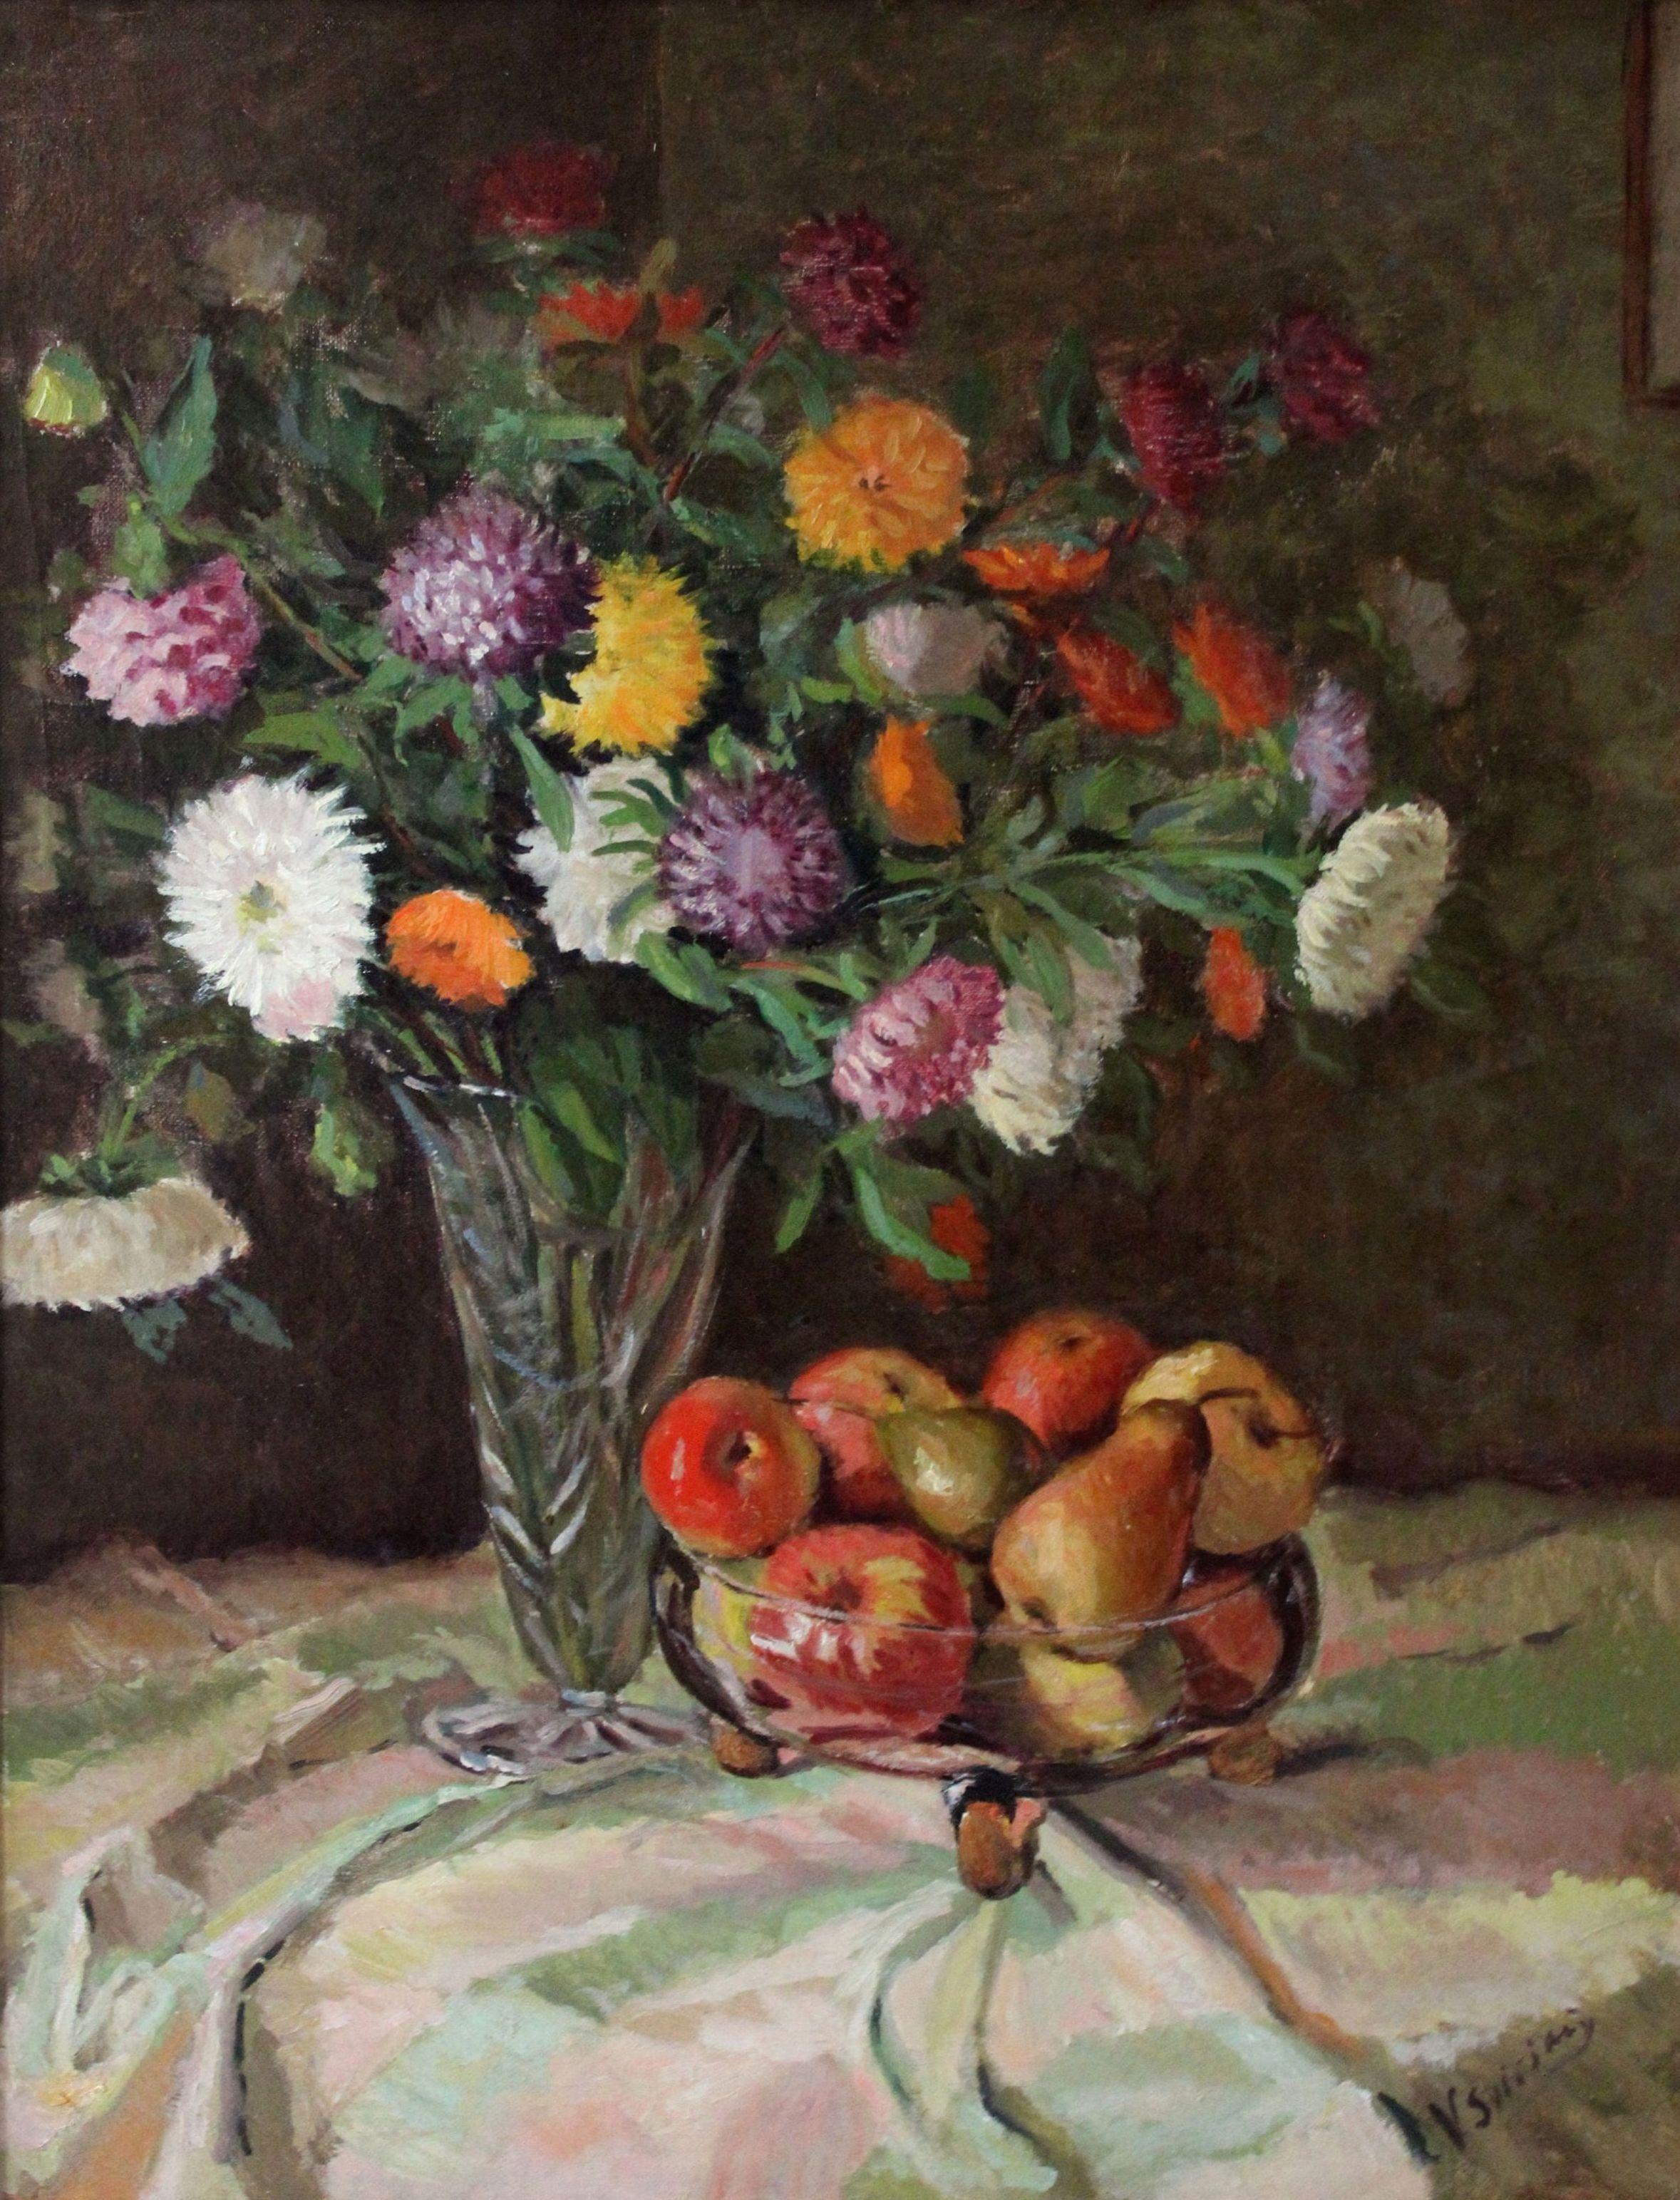 Svirskis Vitolds  Still-Life Painting - Still Life with flowers and fruits. Oil on canvas, 79, 5 x 61 cm